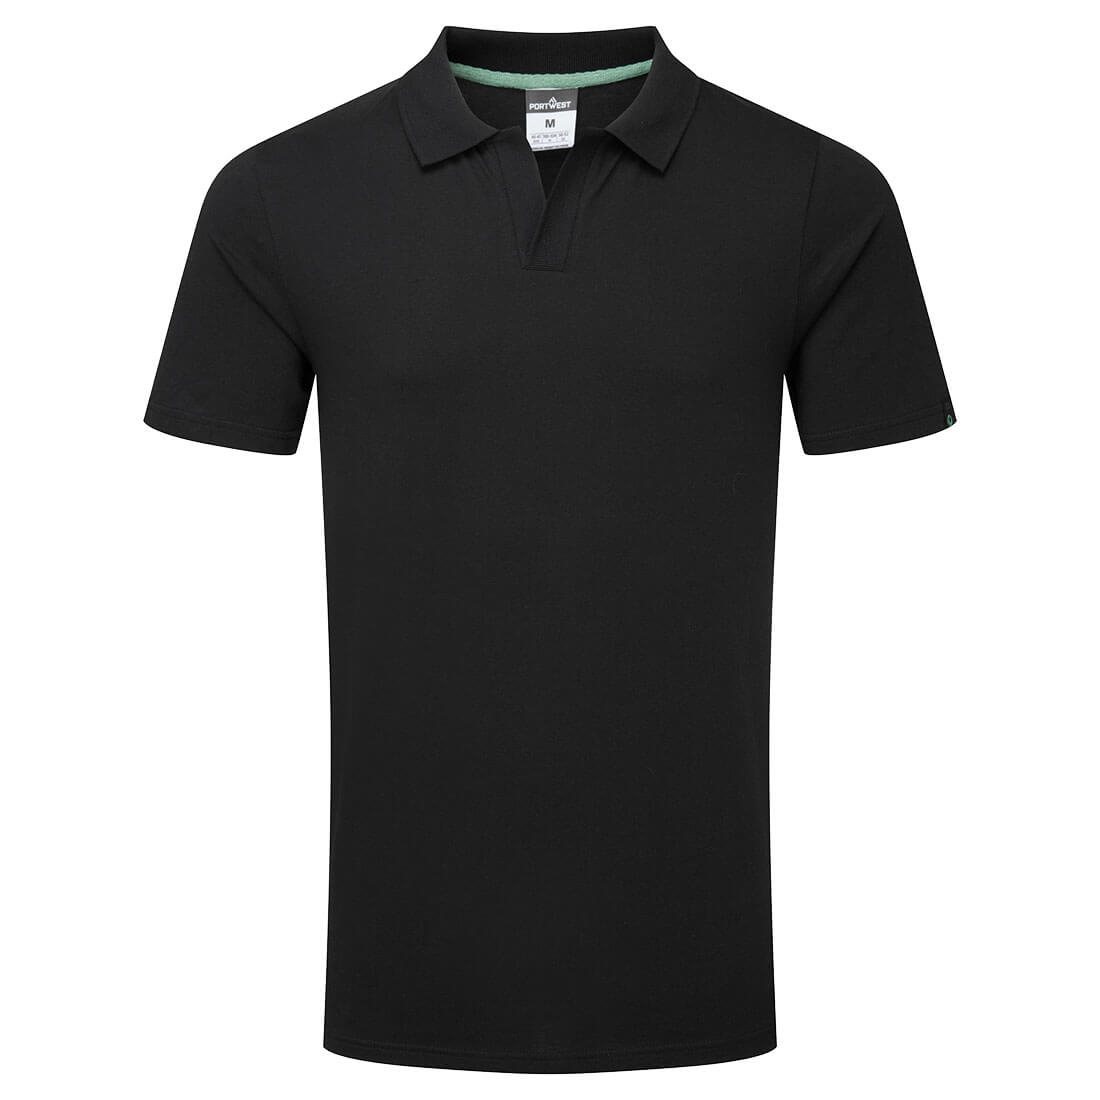 Portwest Organic Cotton Recyclable Polo Shirt